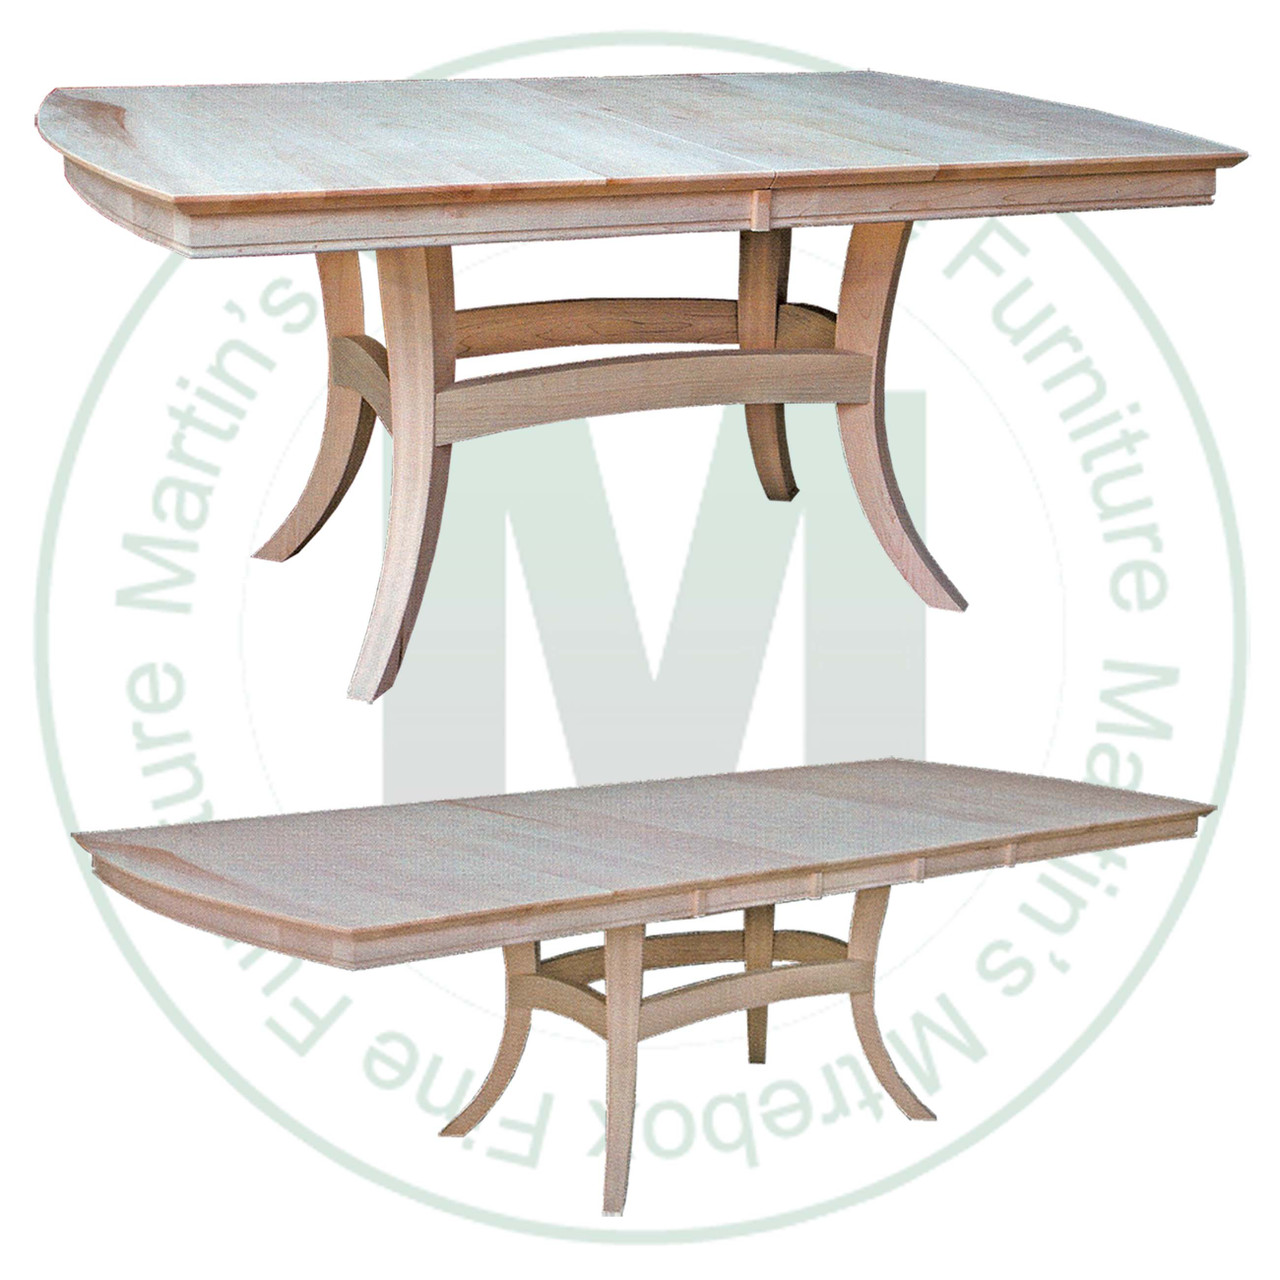 Maple Tokyo Double Pedestal Table 42''D x 84''W x 30''H With 4 - 12'' Leaves